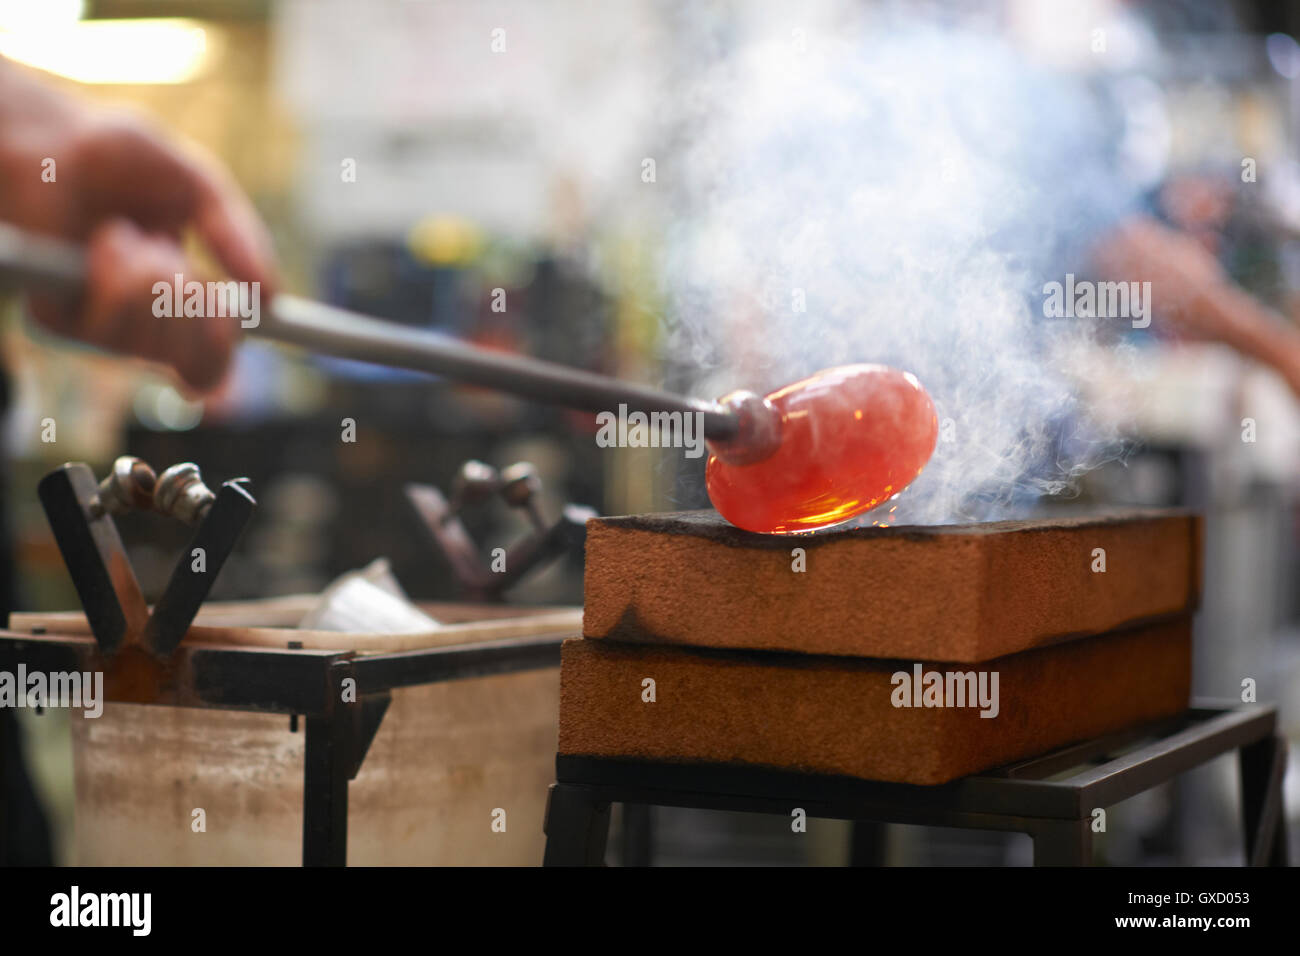 Molten glass material being shaped on blowpipe in workshop Stock Photo